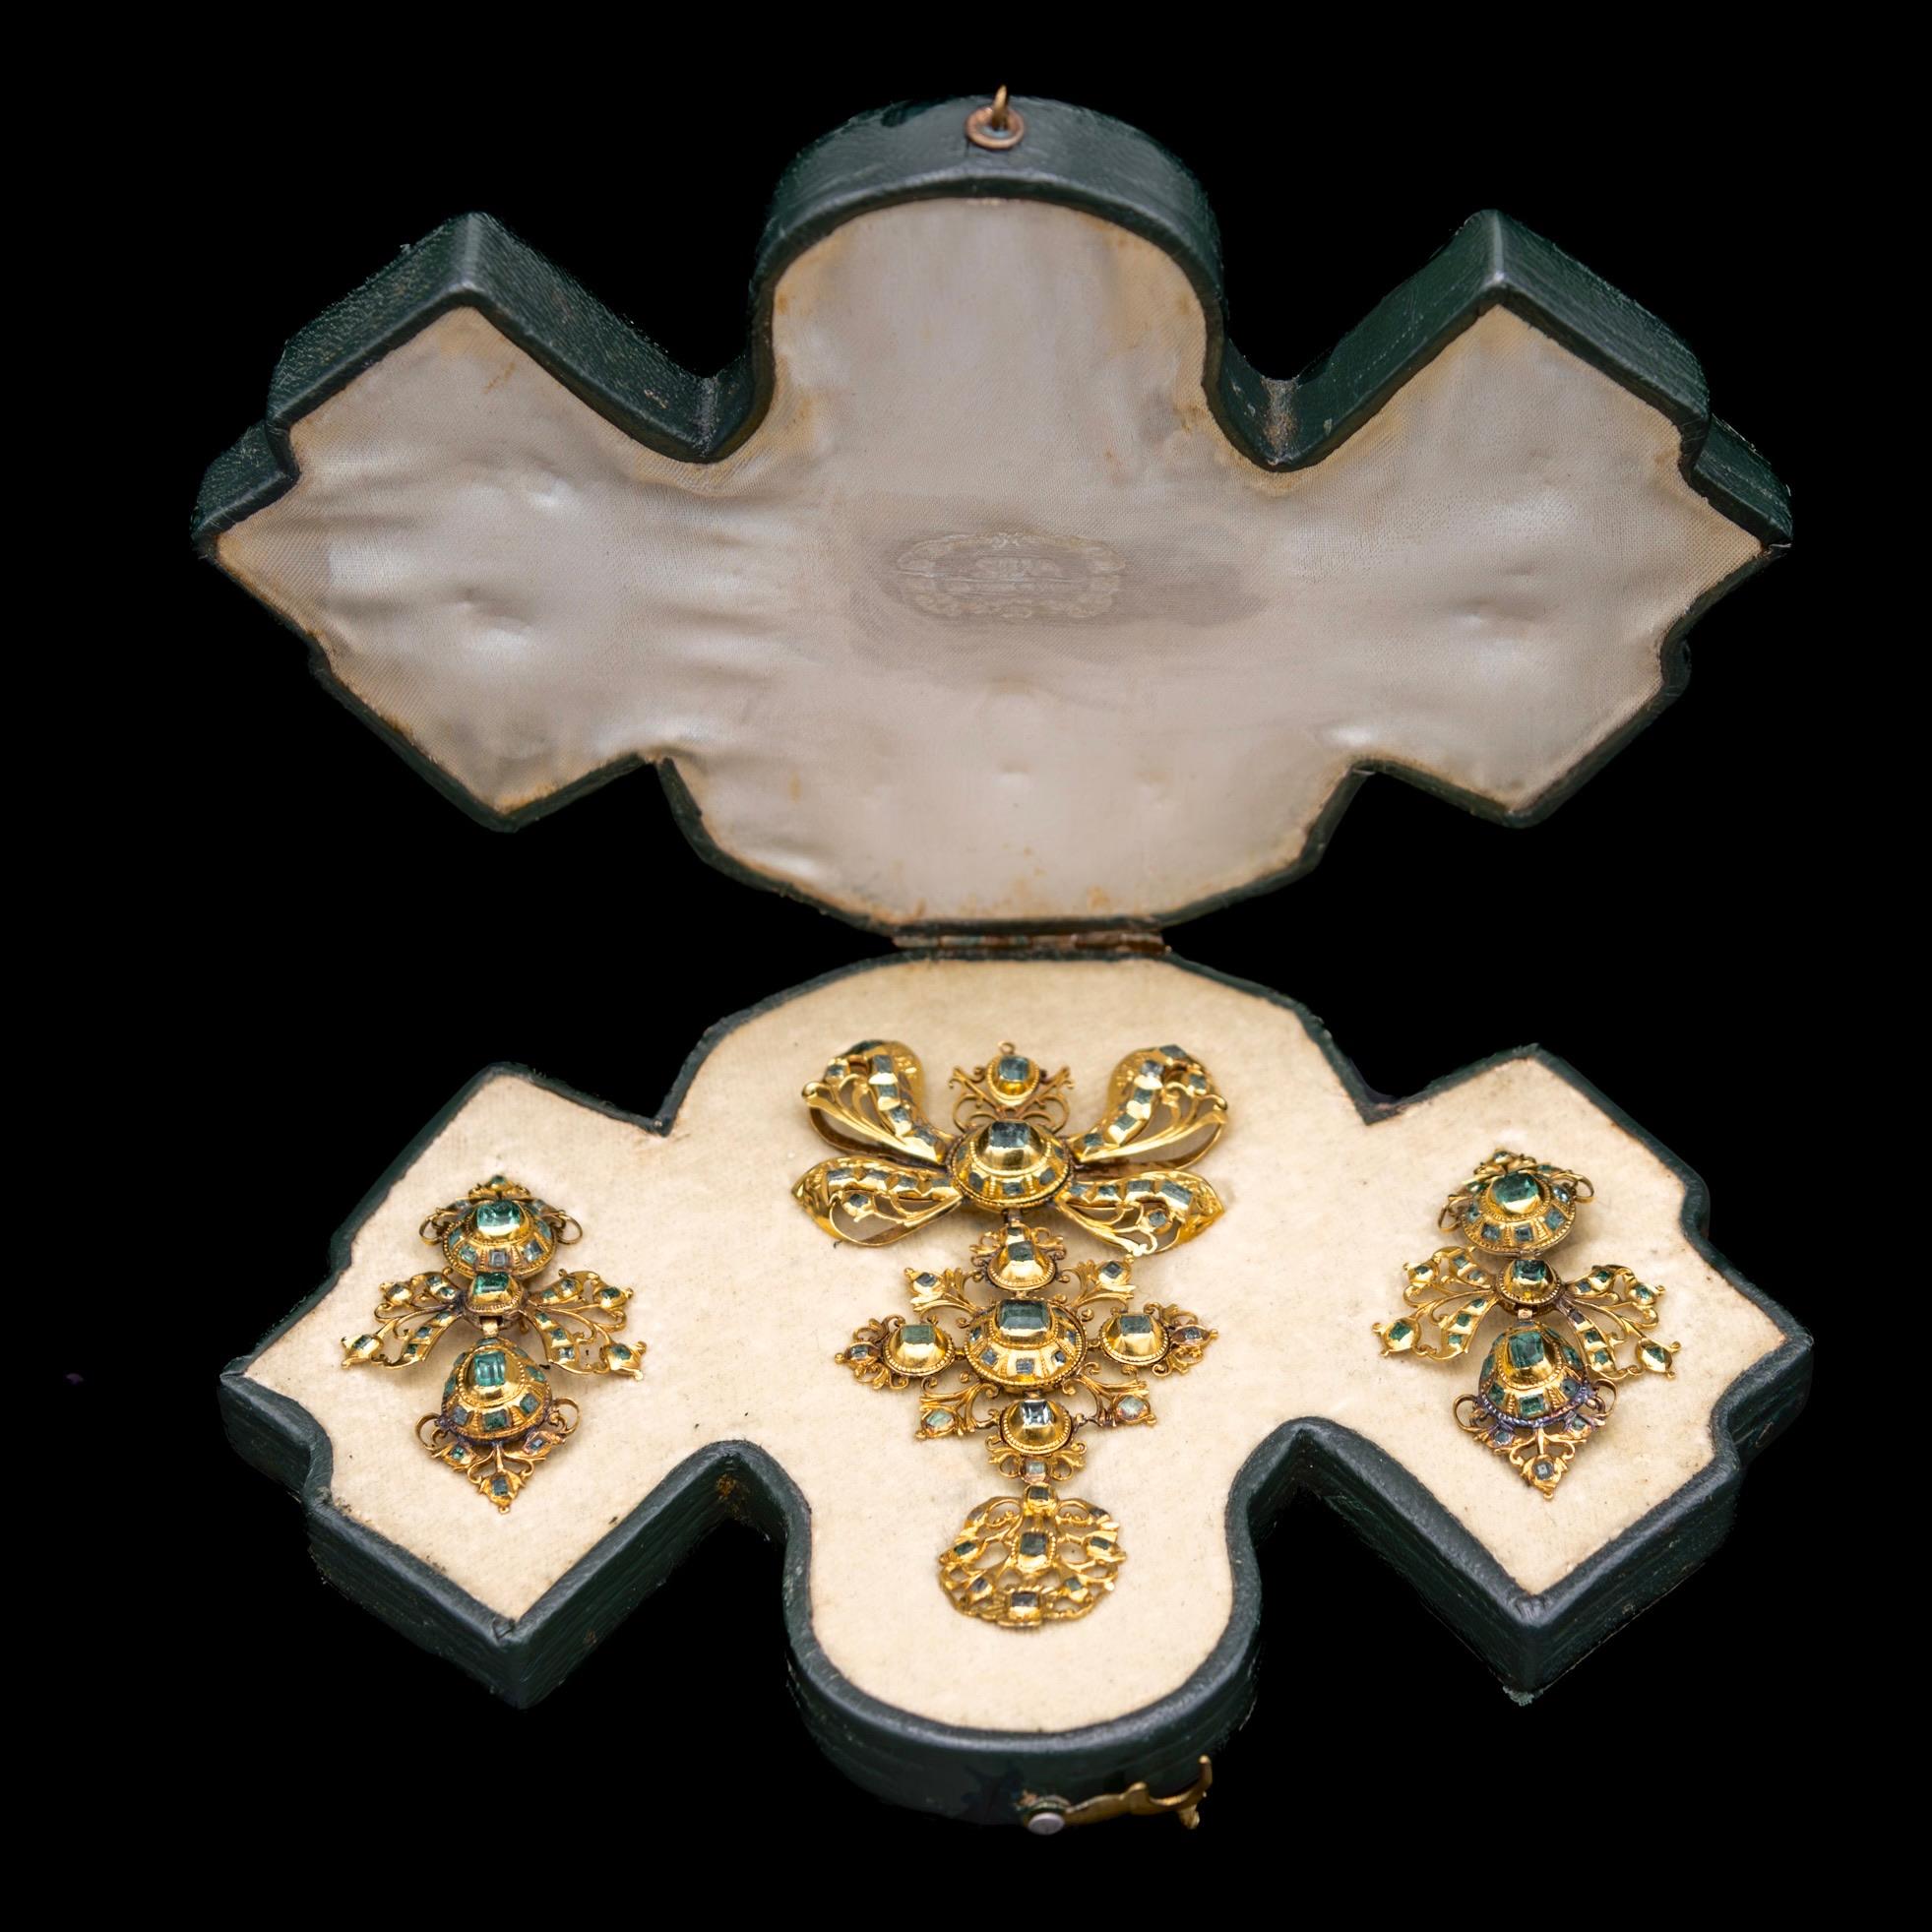 Antique 18th century Iberian emerald demi-parure composed by earrings and brooch/pendant in yellow gold, with Spanish hallmarks and accompanied by fitted leather case. Indulge in the timeless allure of this exquisite 18th-century Iberian emerald